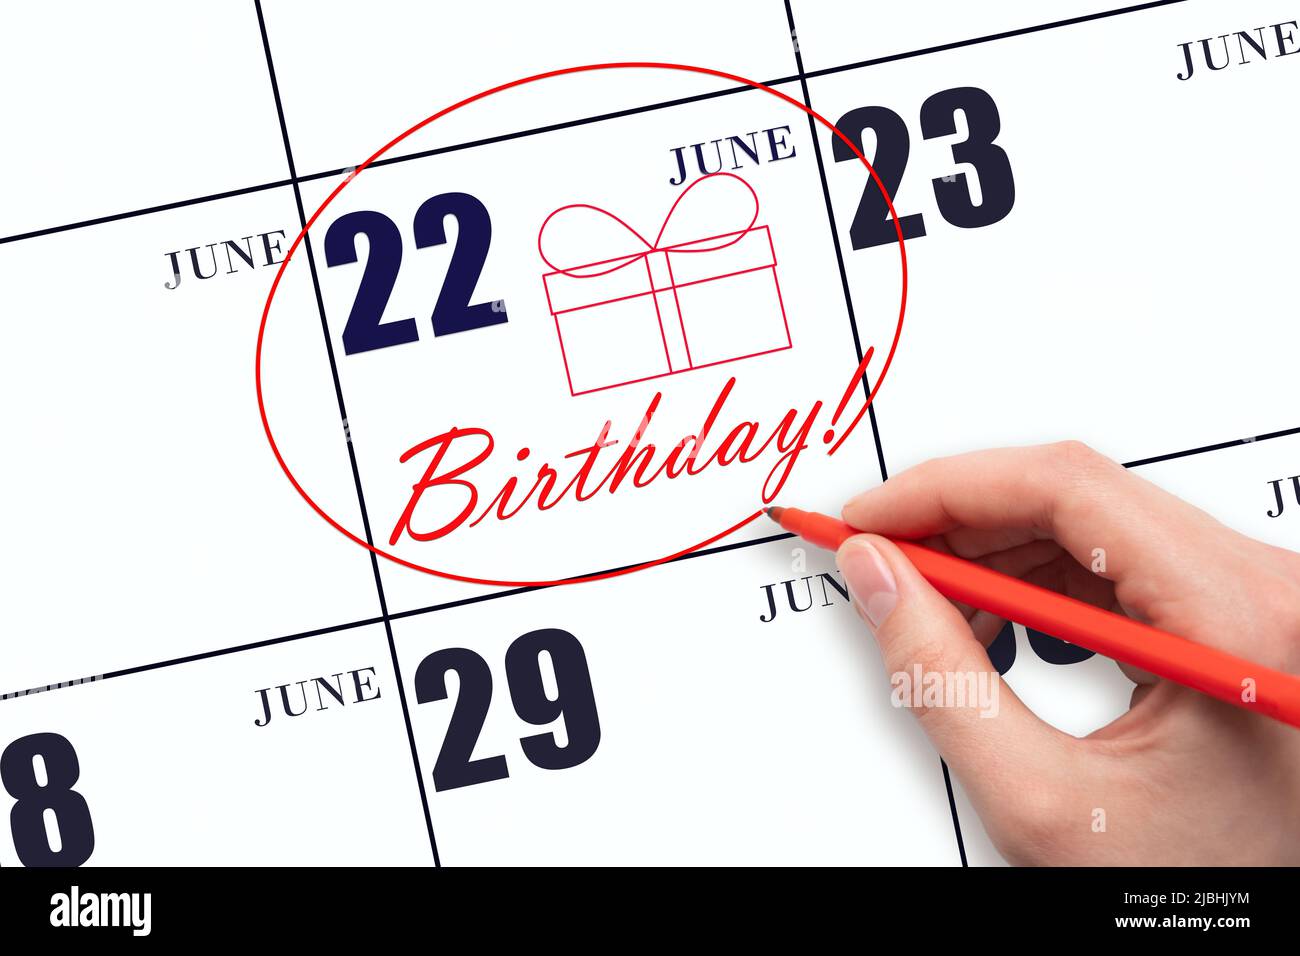 22nd day of June. The hand circles the date on the calendar 22 June, draws a gift box and writes the text Birthday. Holiday. Summer month, day of the Stock Photo - Alamy